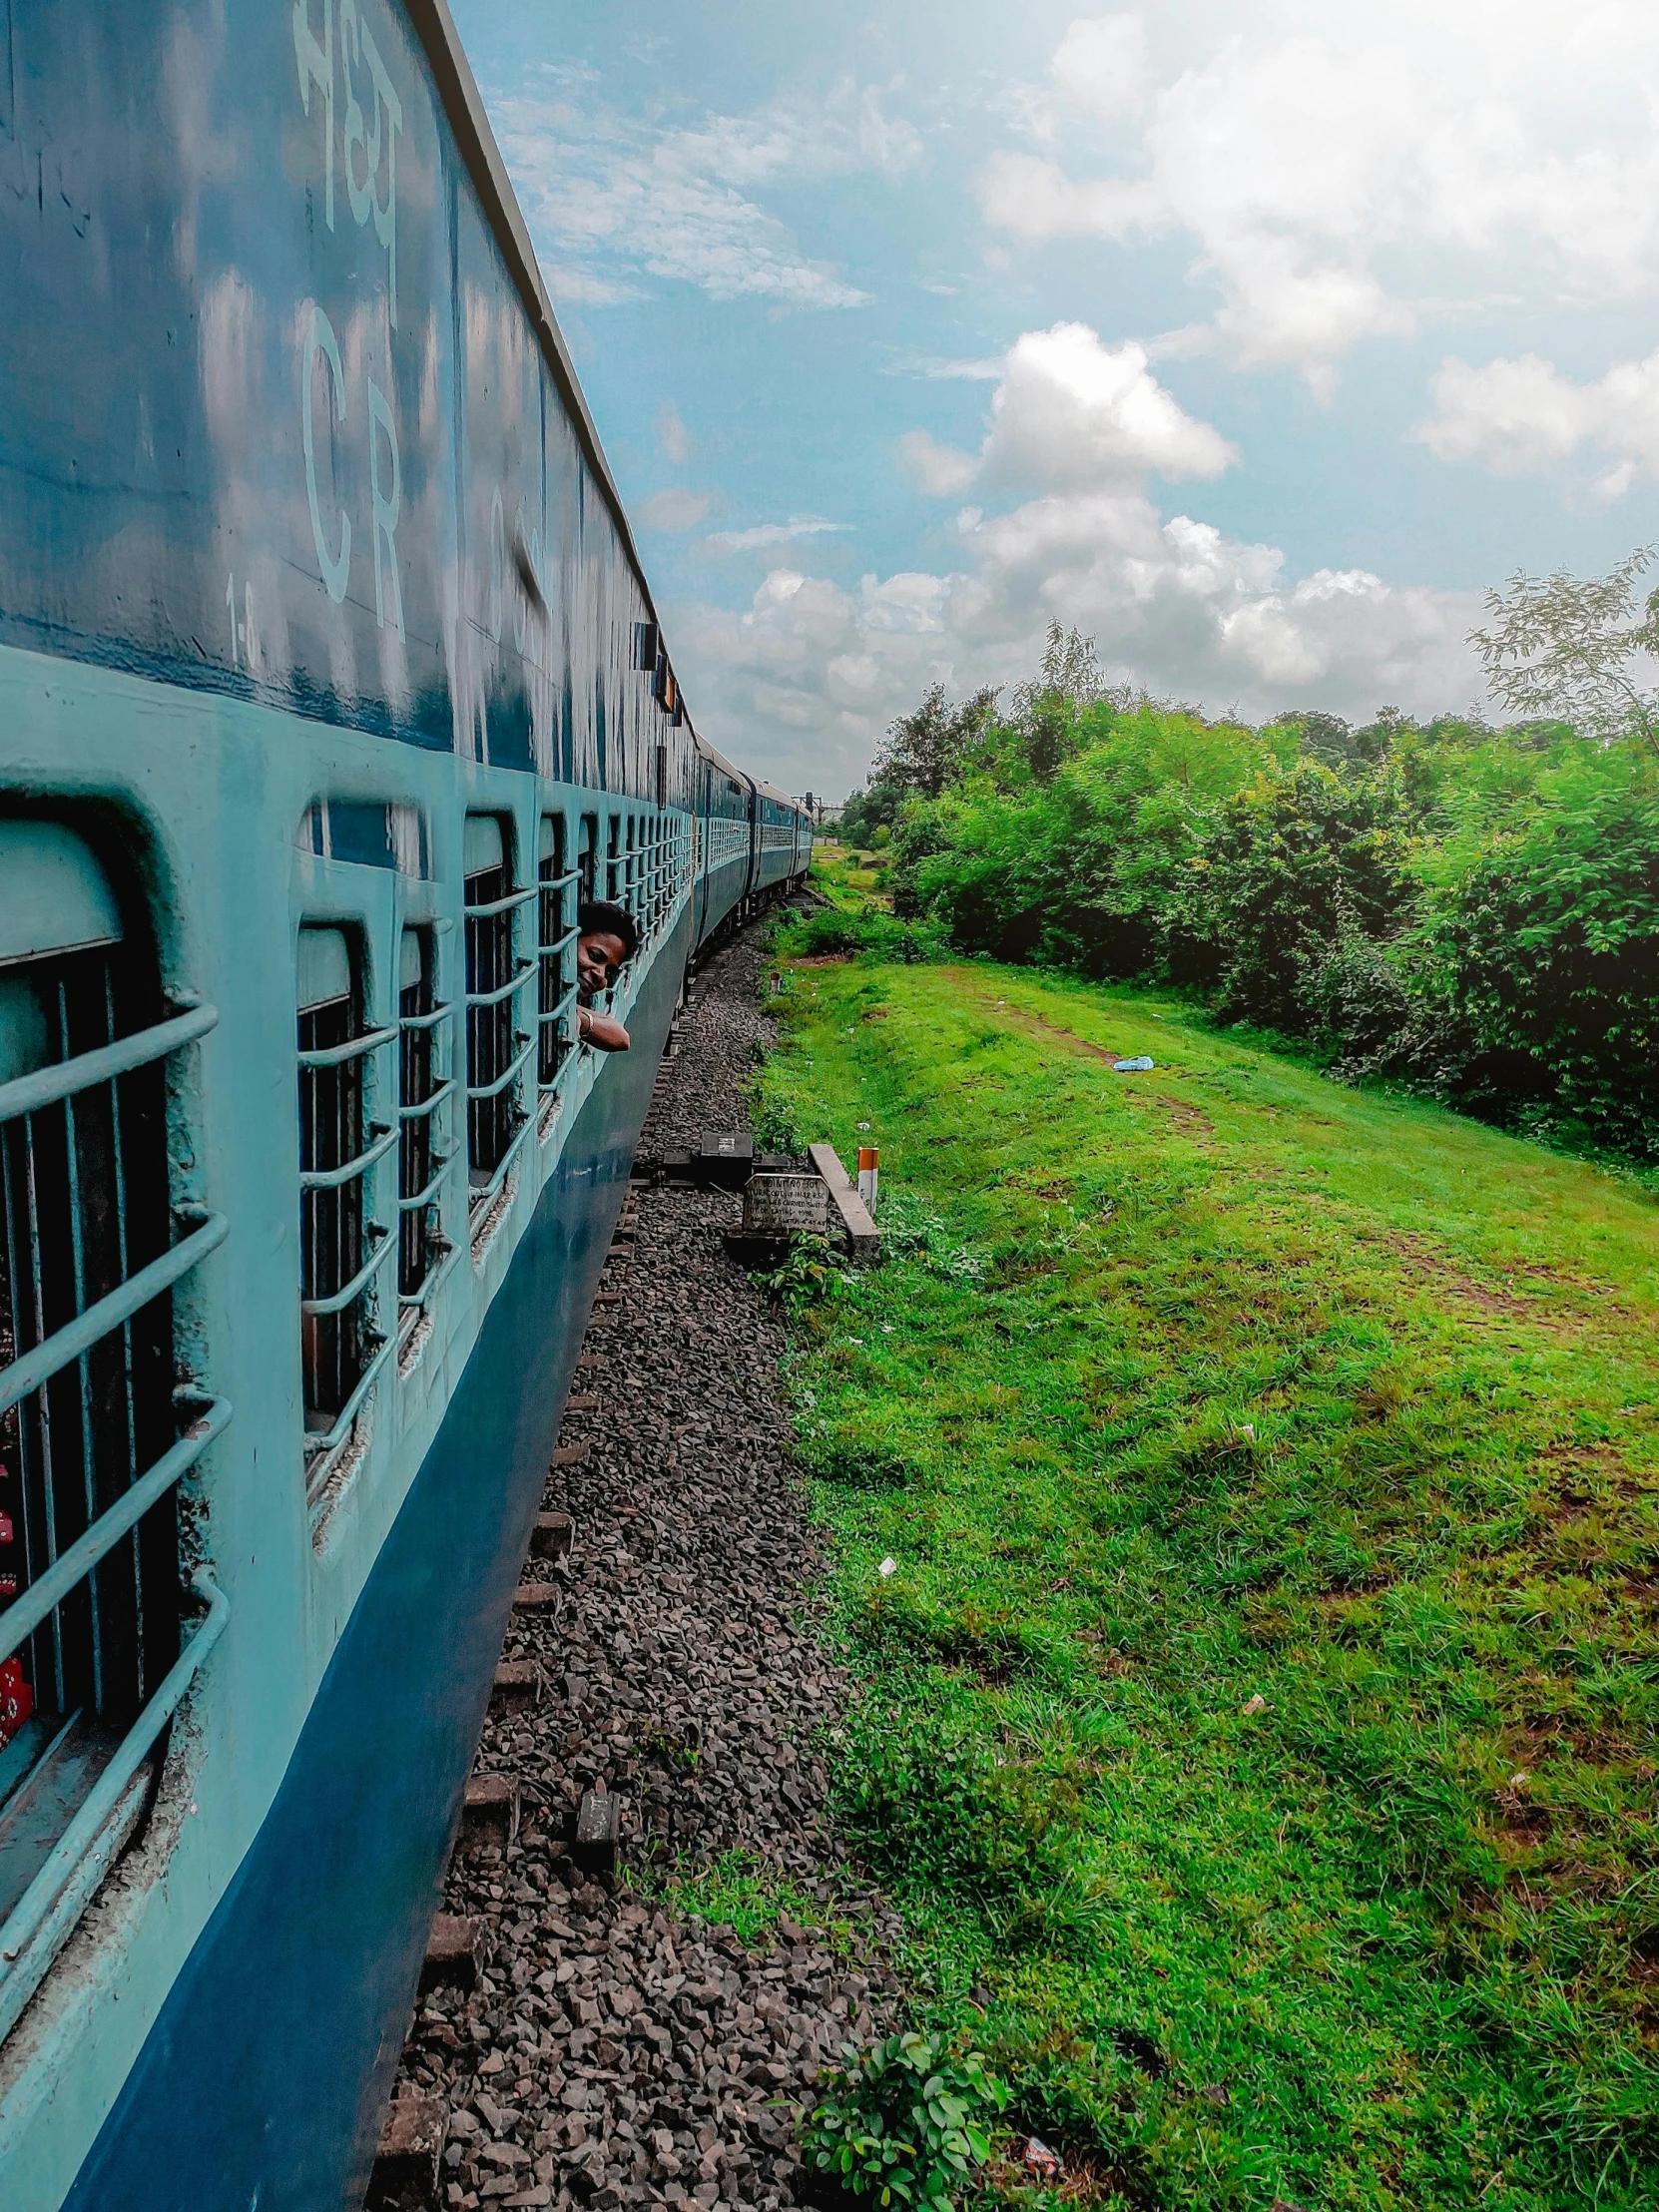 a blue train traveling down train tracks next to a lush green field, inspired by Steve McCurry, pexels contest winner, happening, assamese aesthetic, panorama view, 🤬 🤮 💕 🎀, profile image